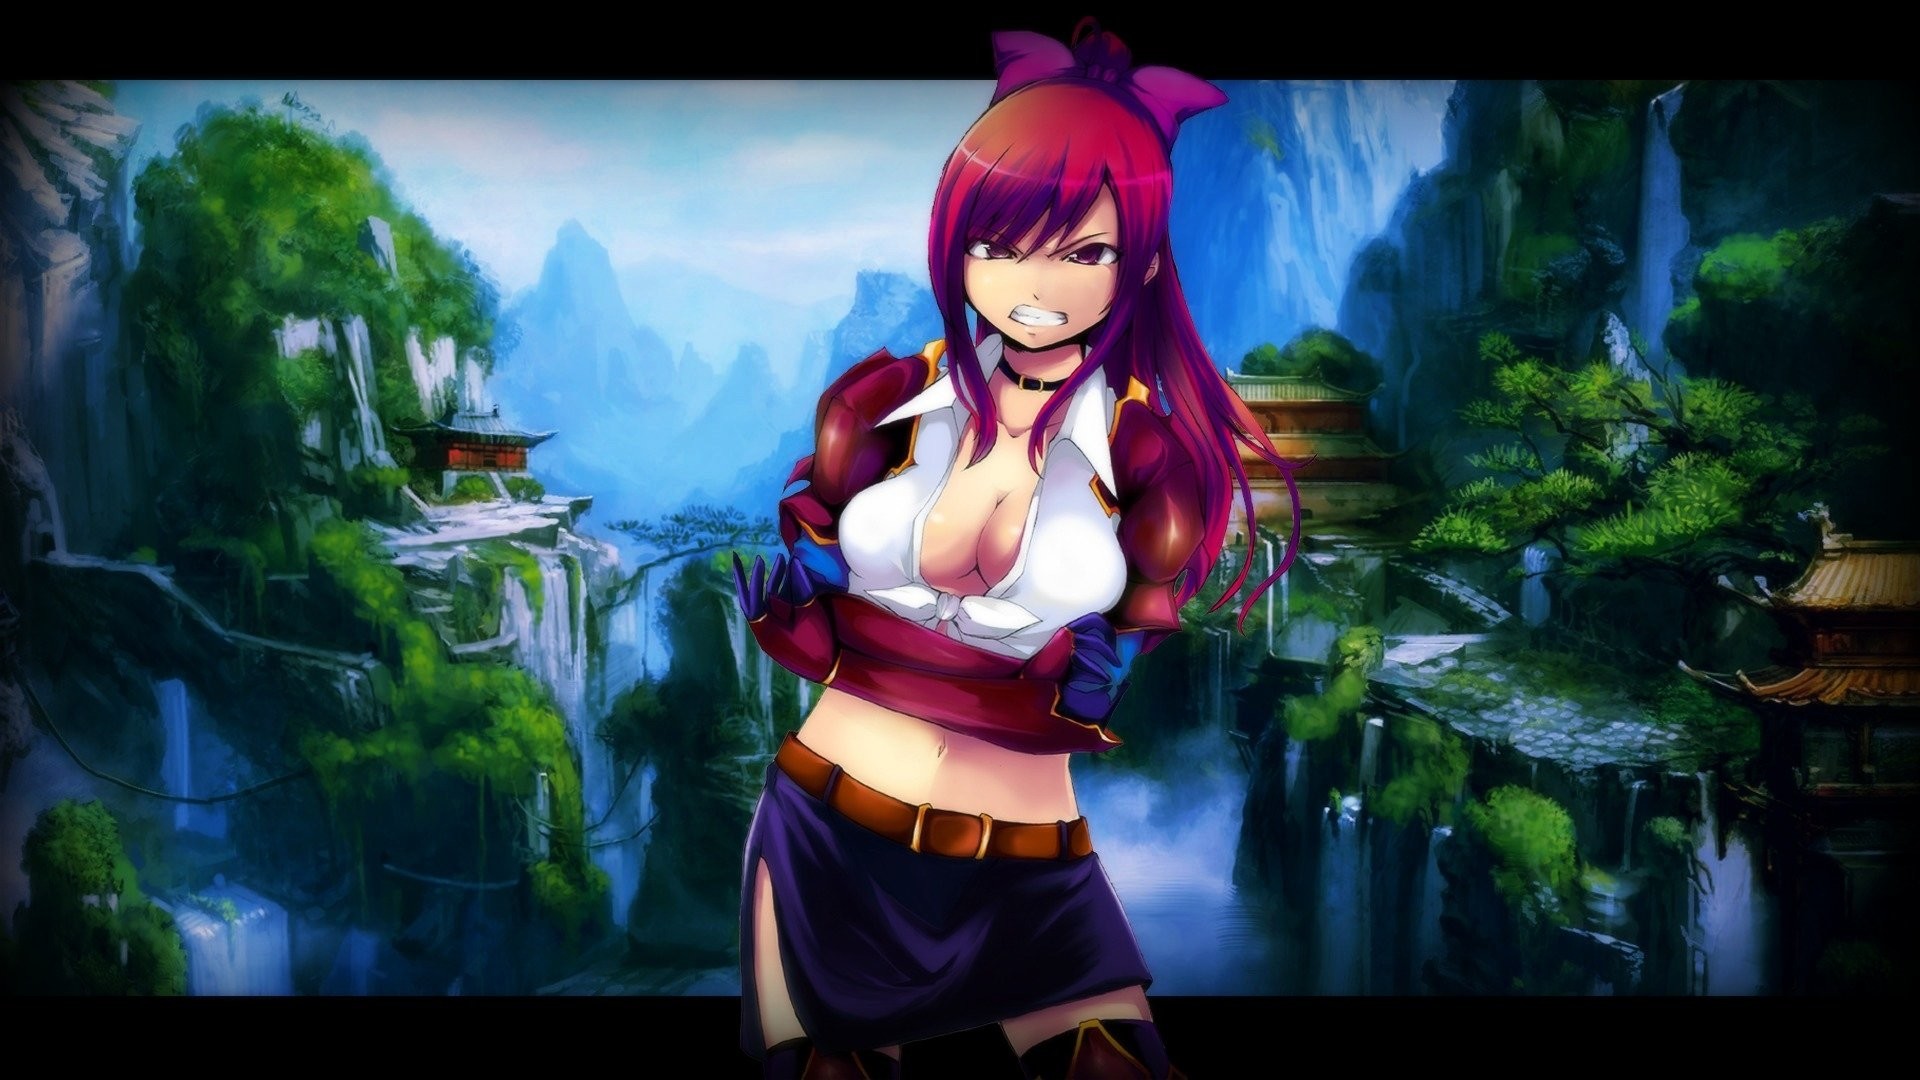 1920x1080 Anime - Fairy Tail Erza Scarlet Red Hair Wallpaper